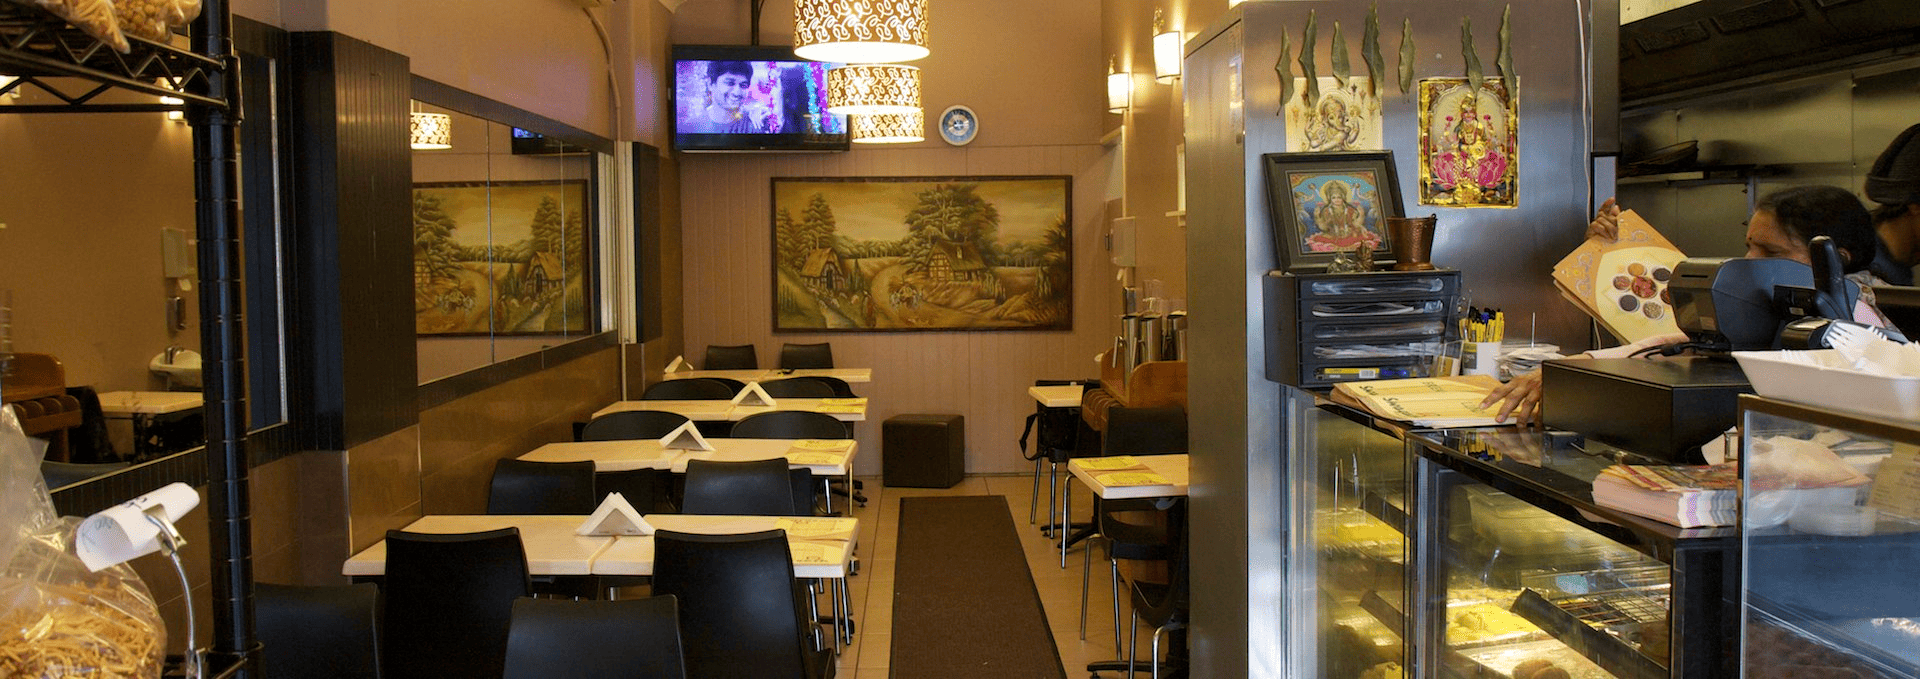 Swagath Biryani House Interior: Homely and welcoming